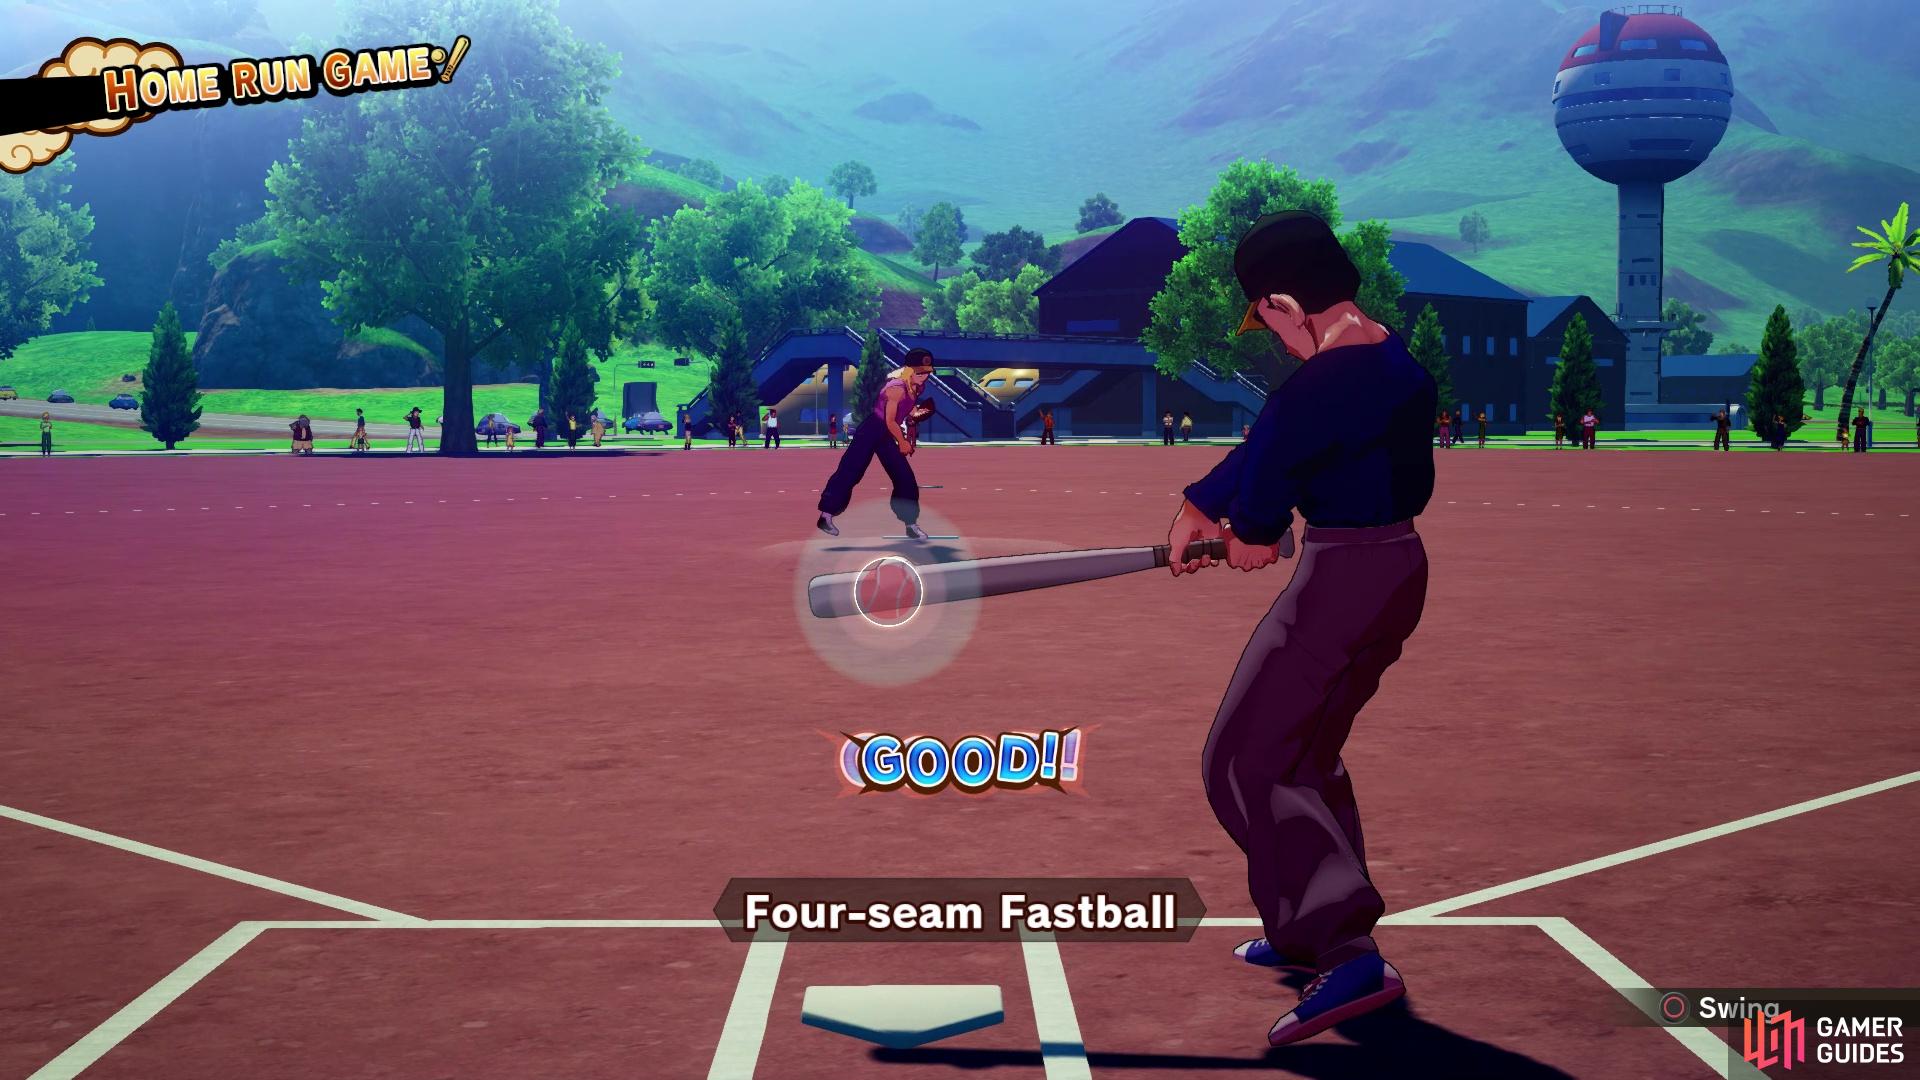 The closer you hit it to the red ball, the further Gohan will hit it